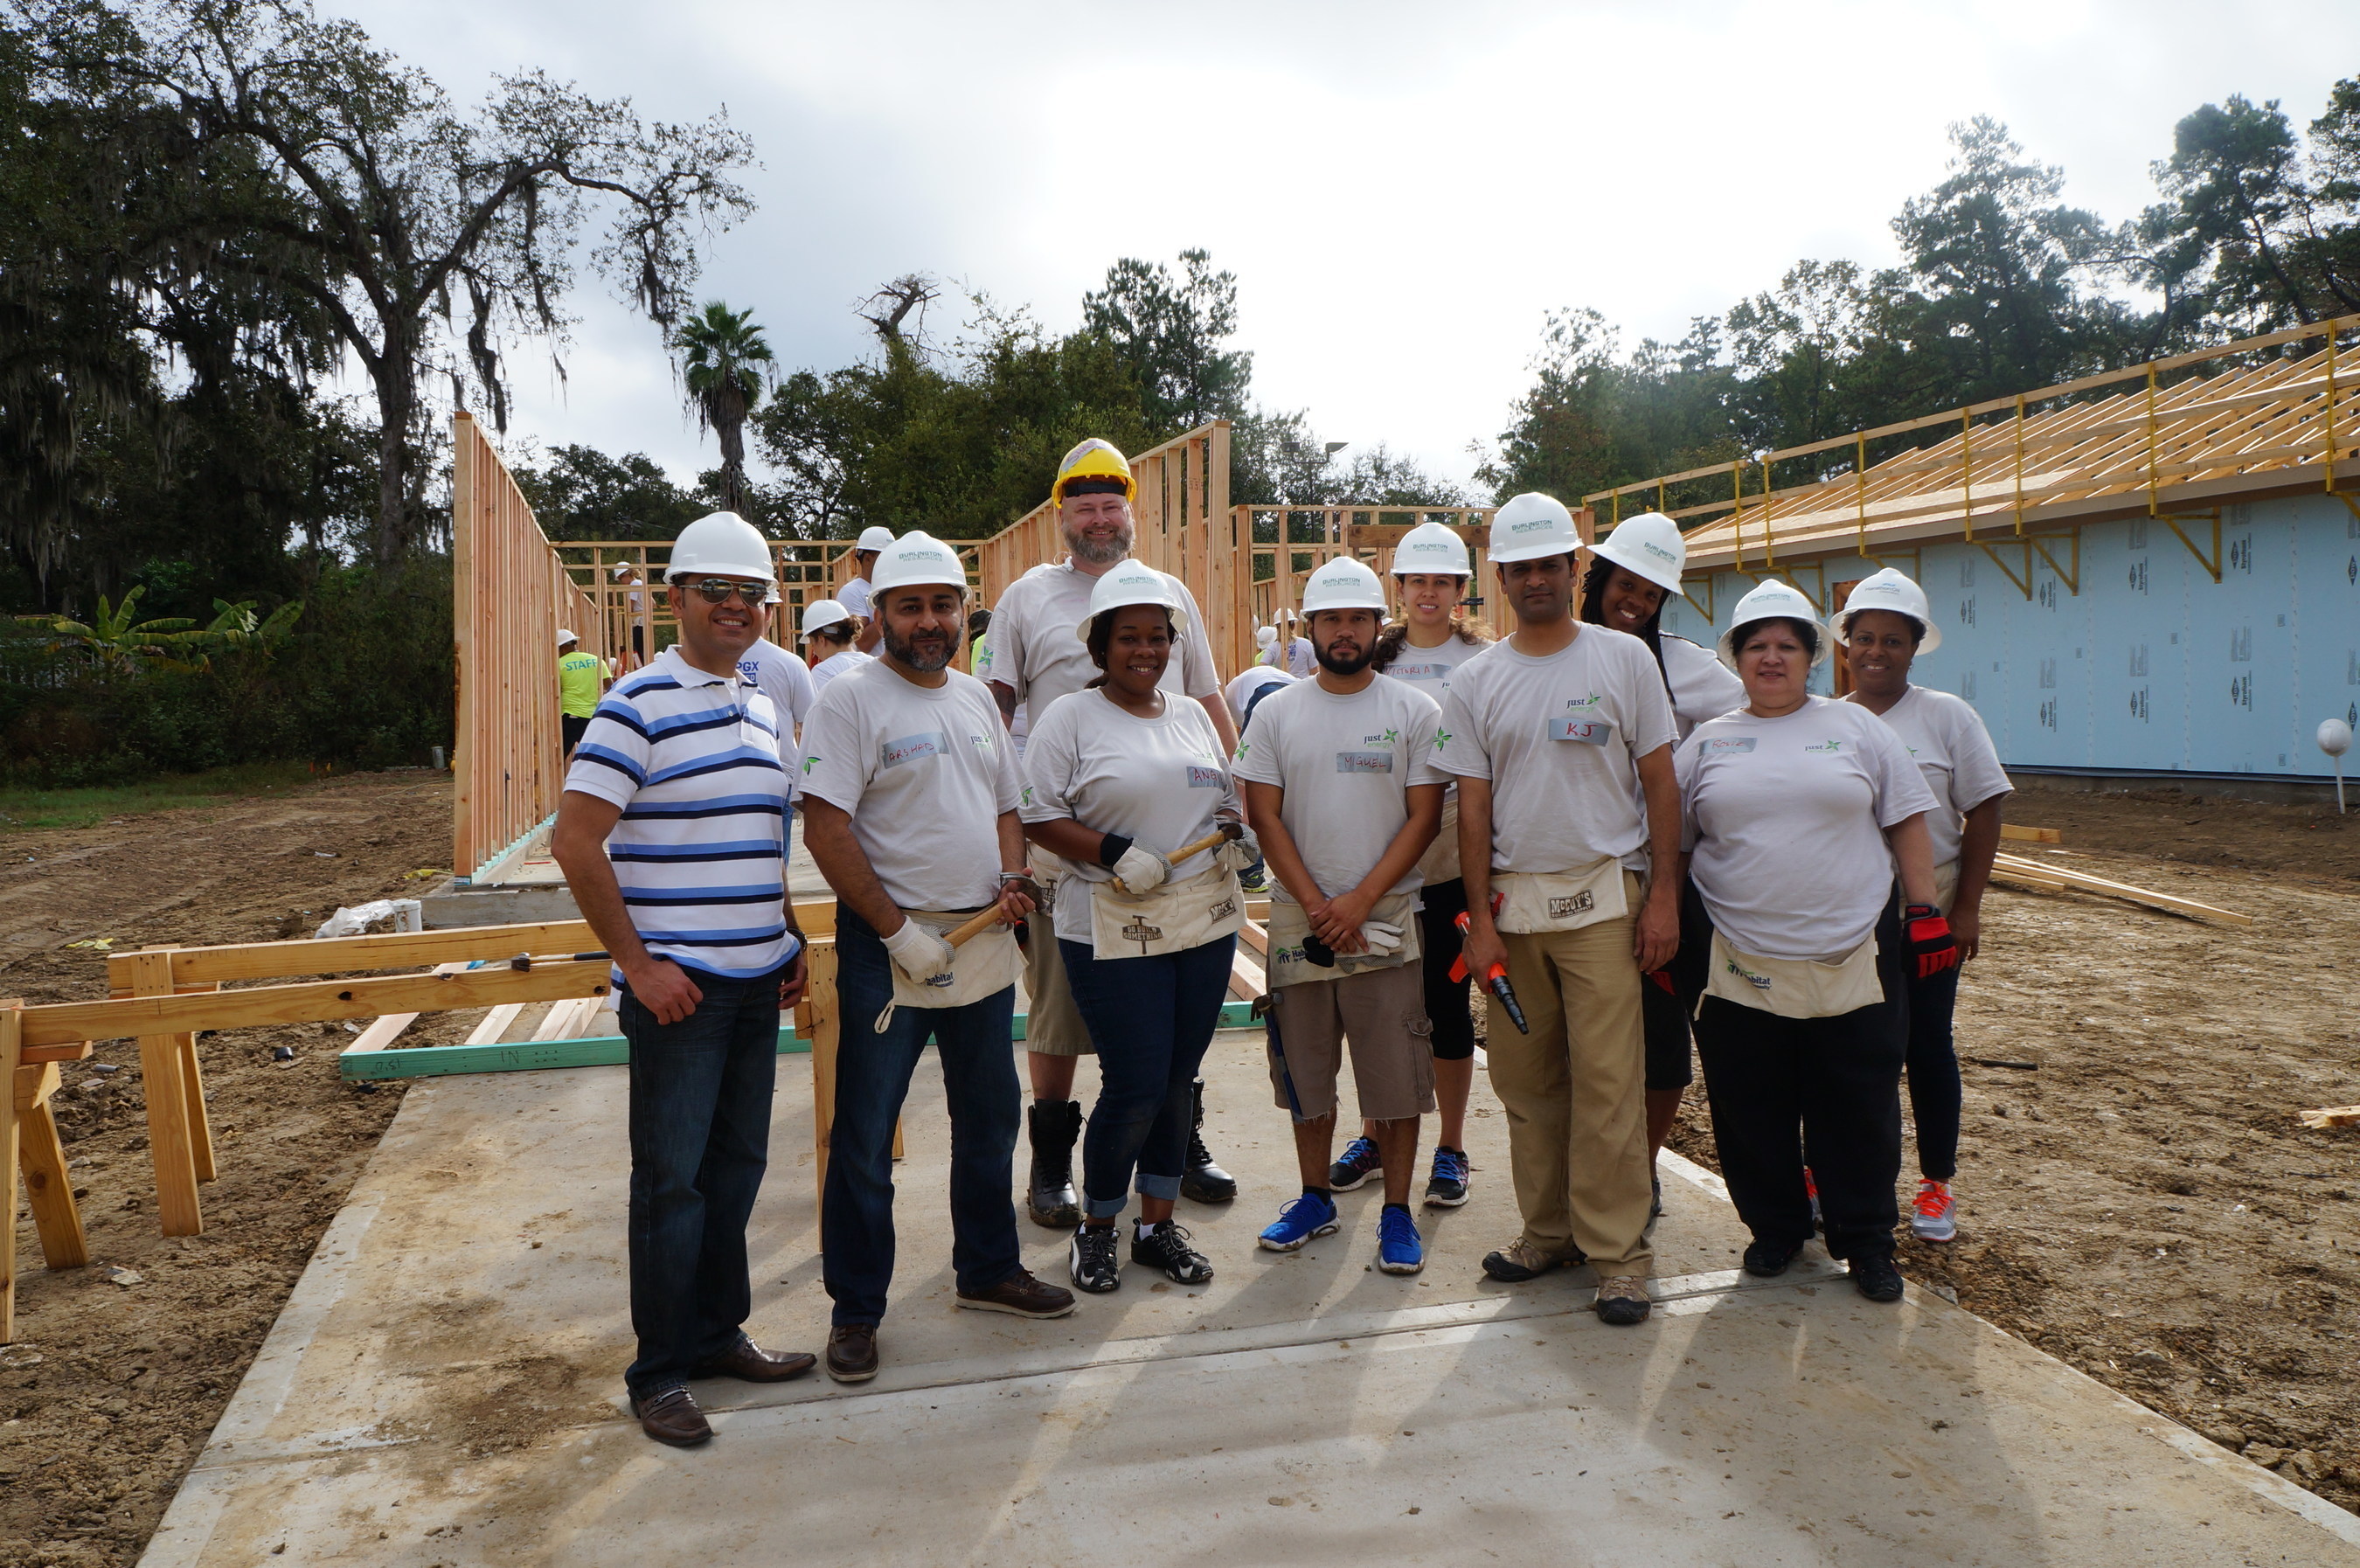 Members of Just Energy's Customer Service Staff in Texas take part in a Habitat for Humanity Build Day